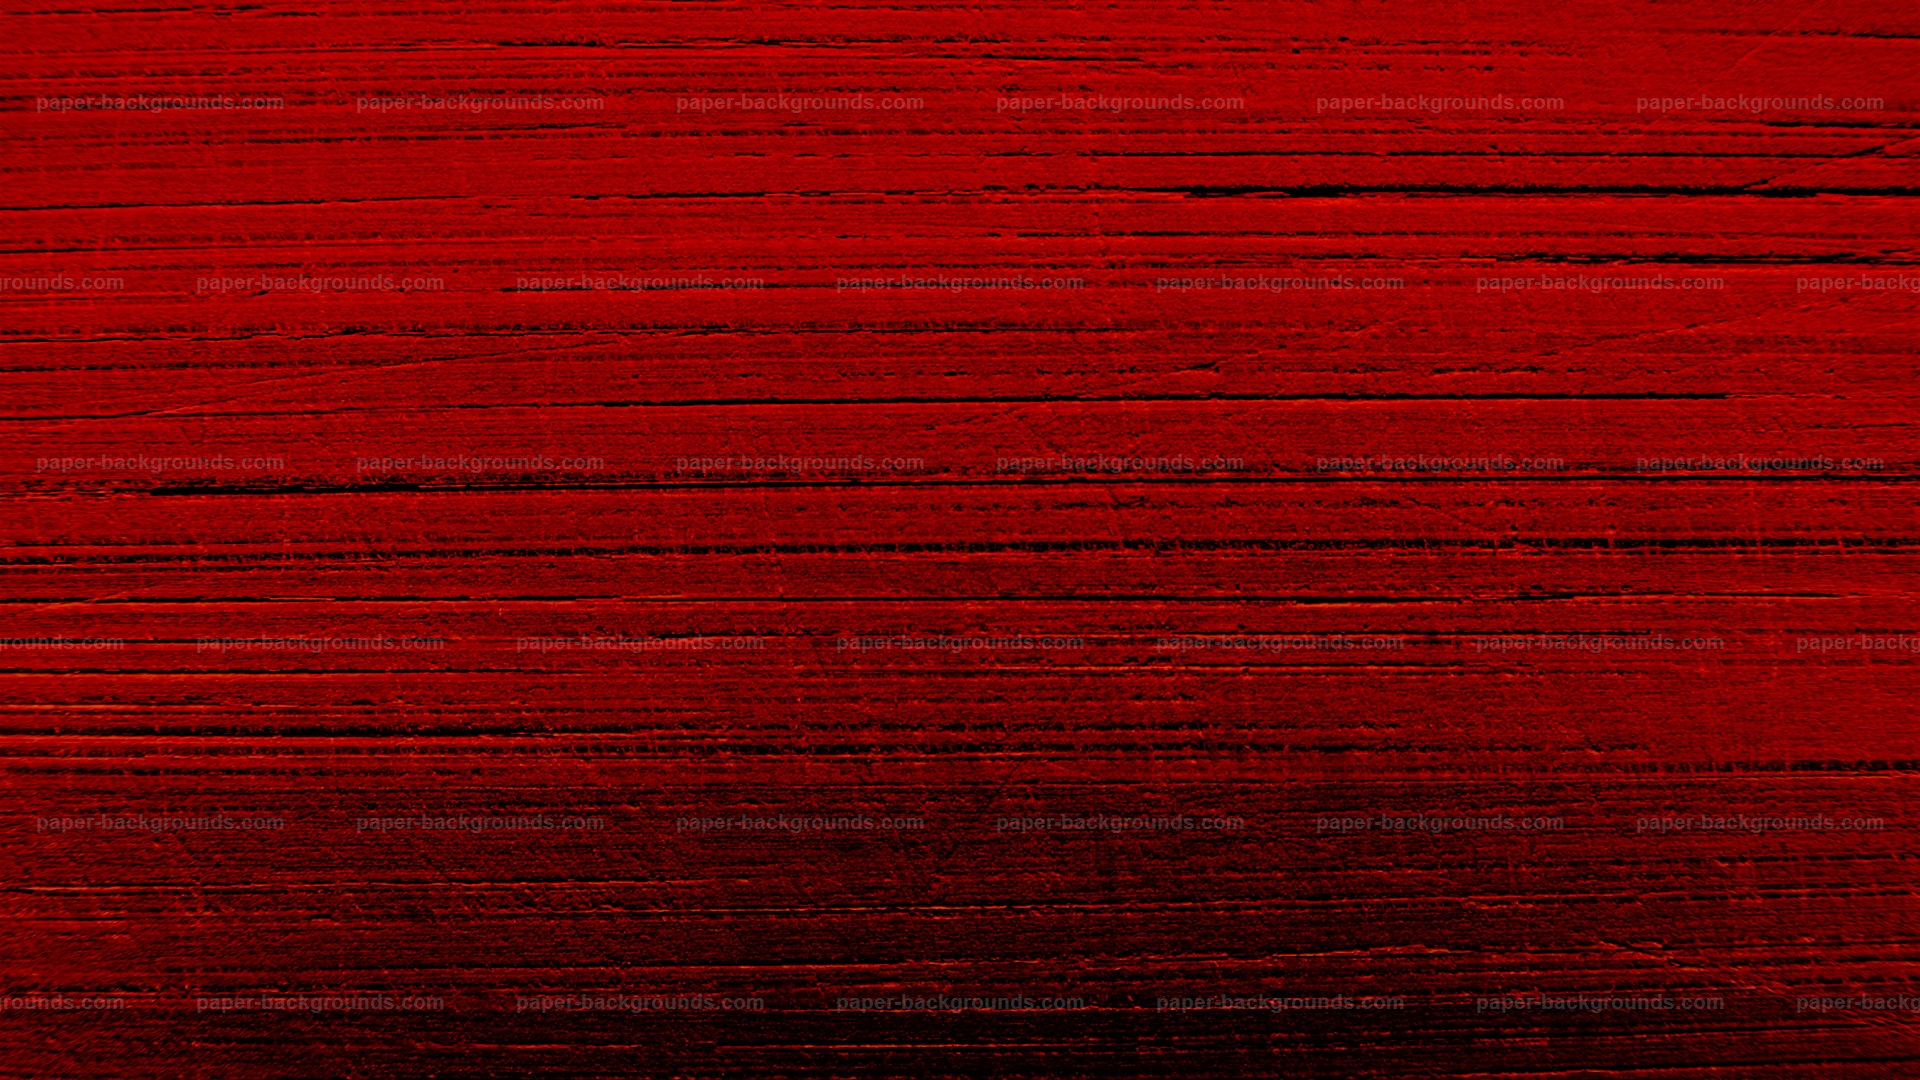 Red wood textured mobile wallpaper background  free image by rawpixelcom   sasi  Wood texture seamless Wood texture Dark wood texture